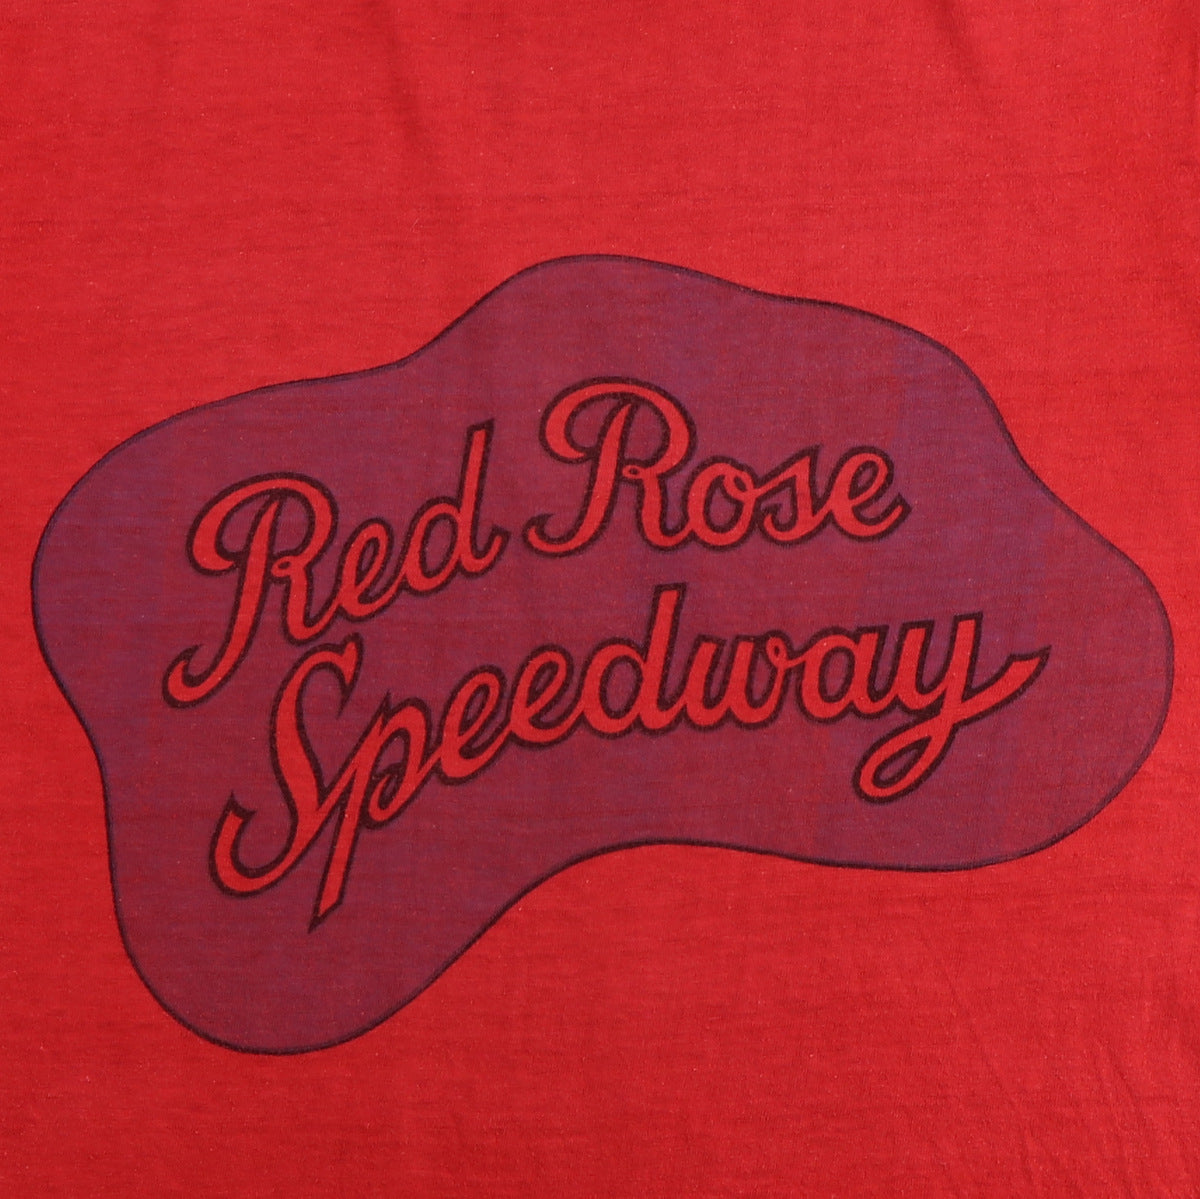 1973 Paul And Wings Red Rose Speedway Shirt – WyCo Vintage